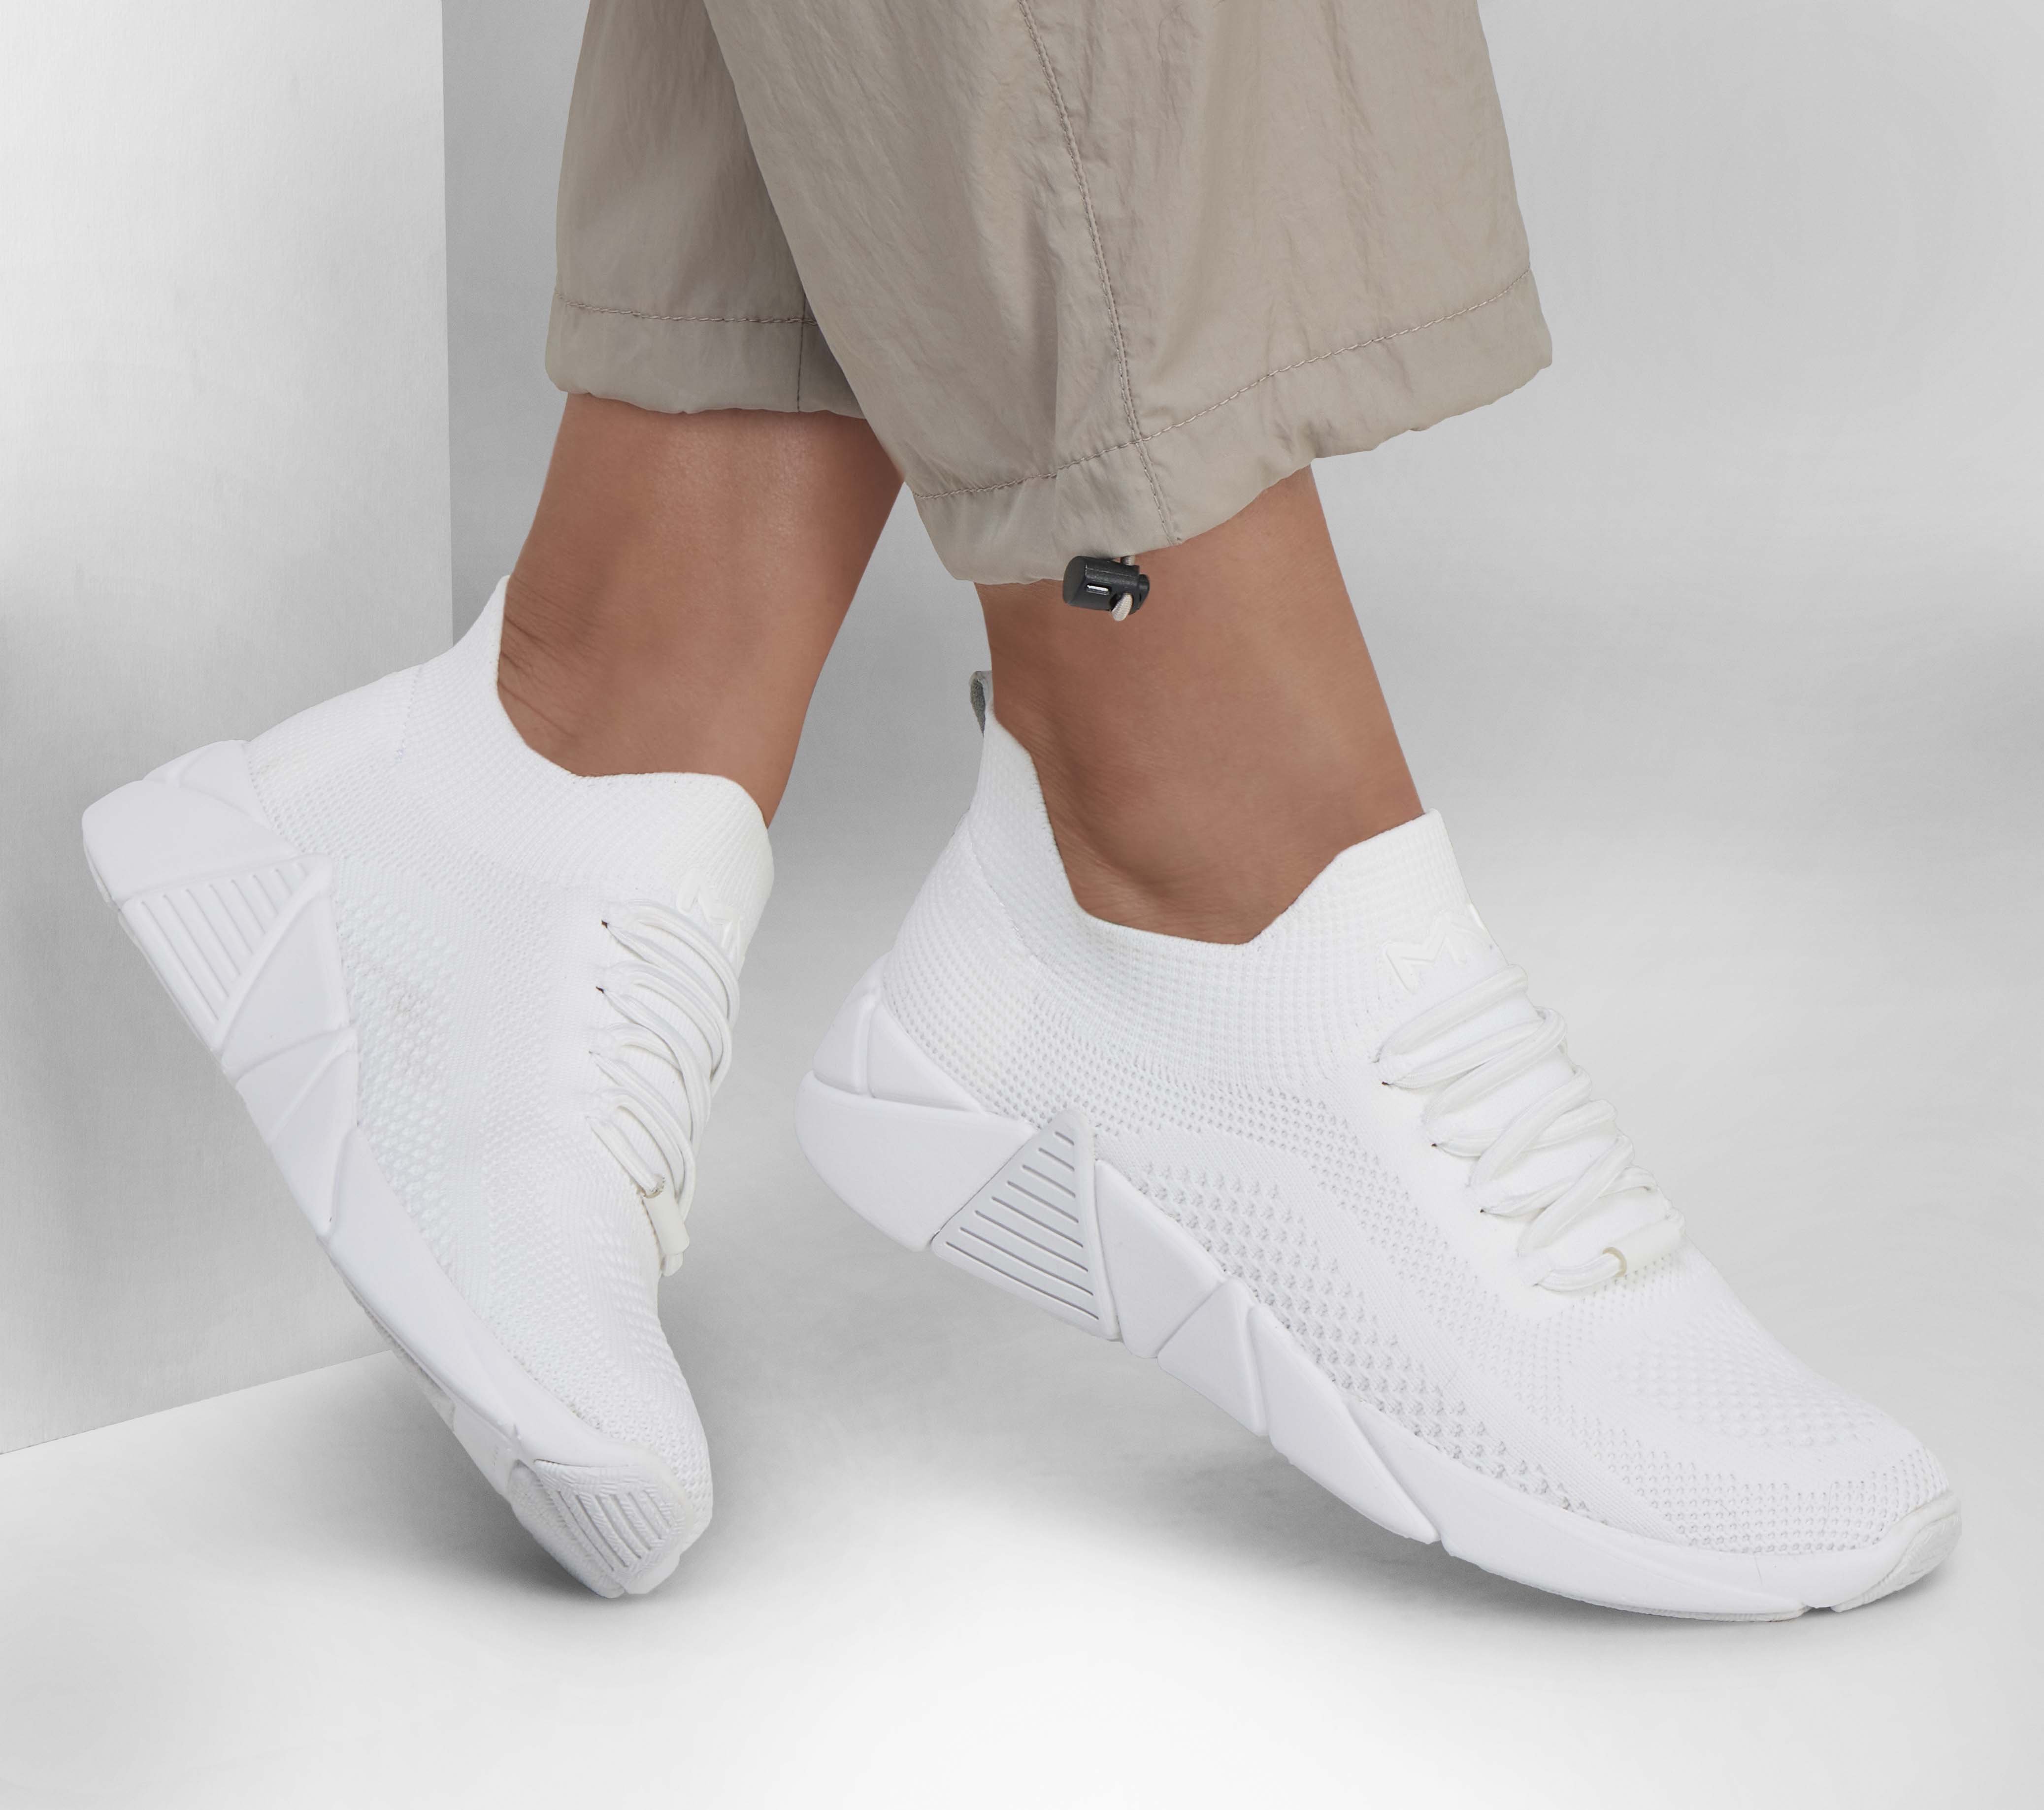 Shop the A-Line - Rider | SKECHERS